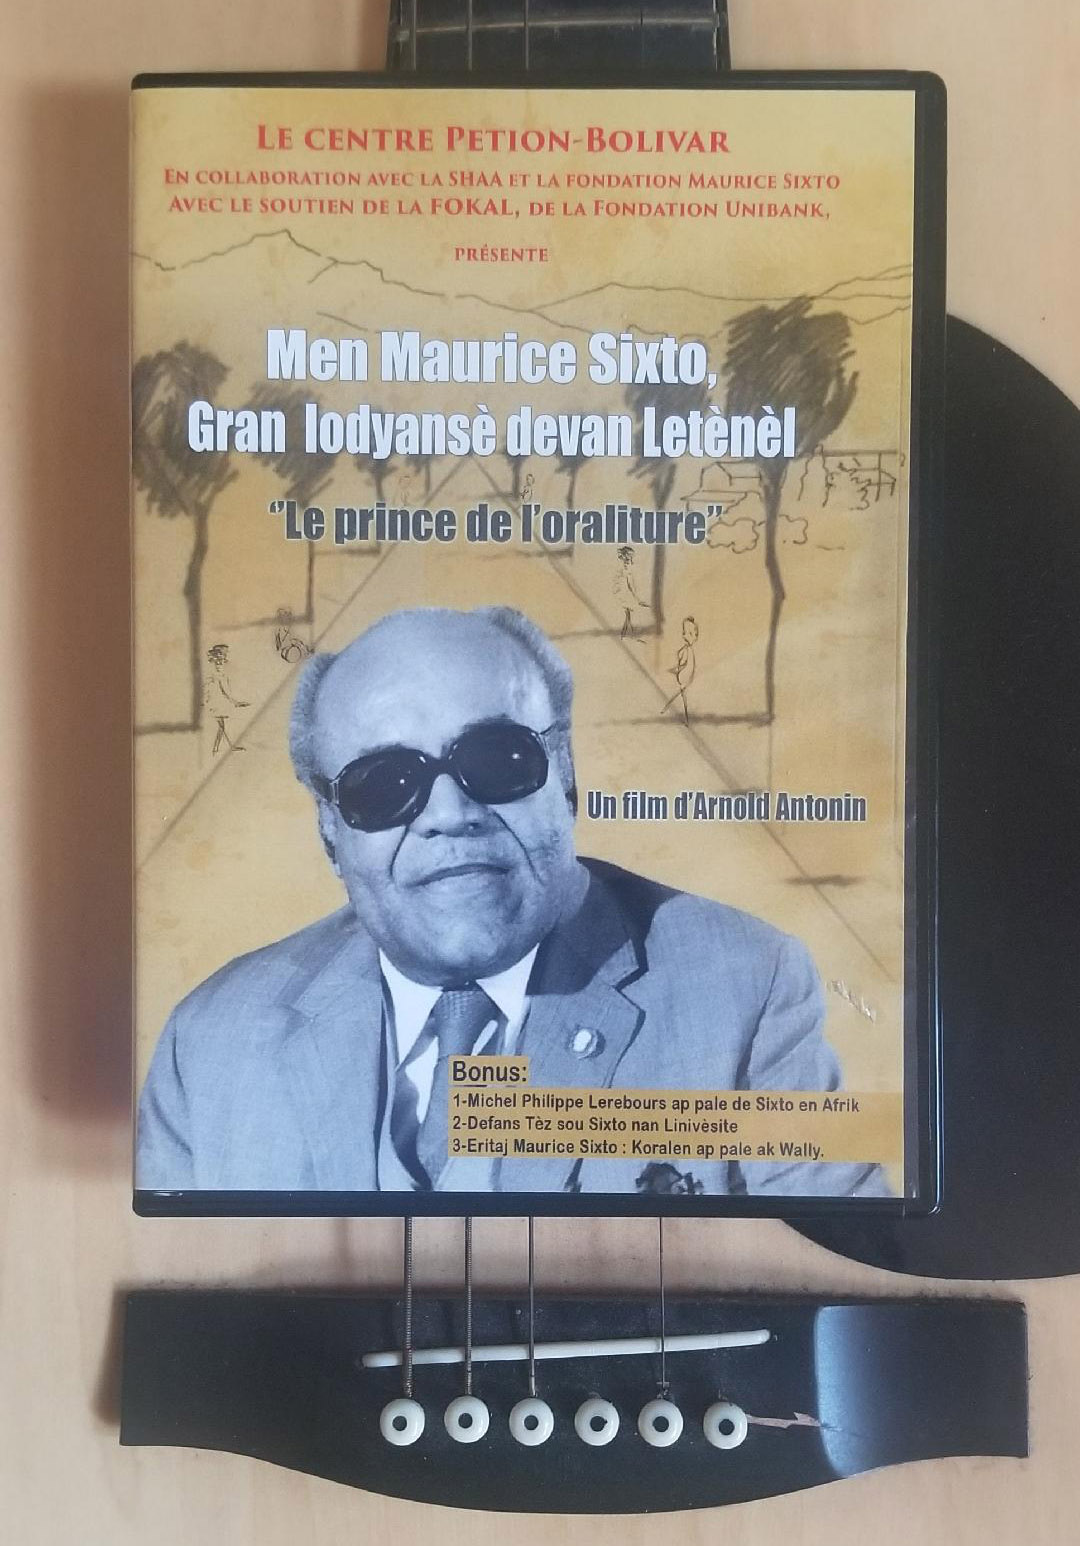 Reproduction of the DVD cover entitled “Here’s Maurice Sixto: The Great Eternal Front Luminous”.